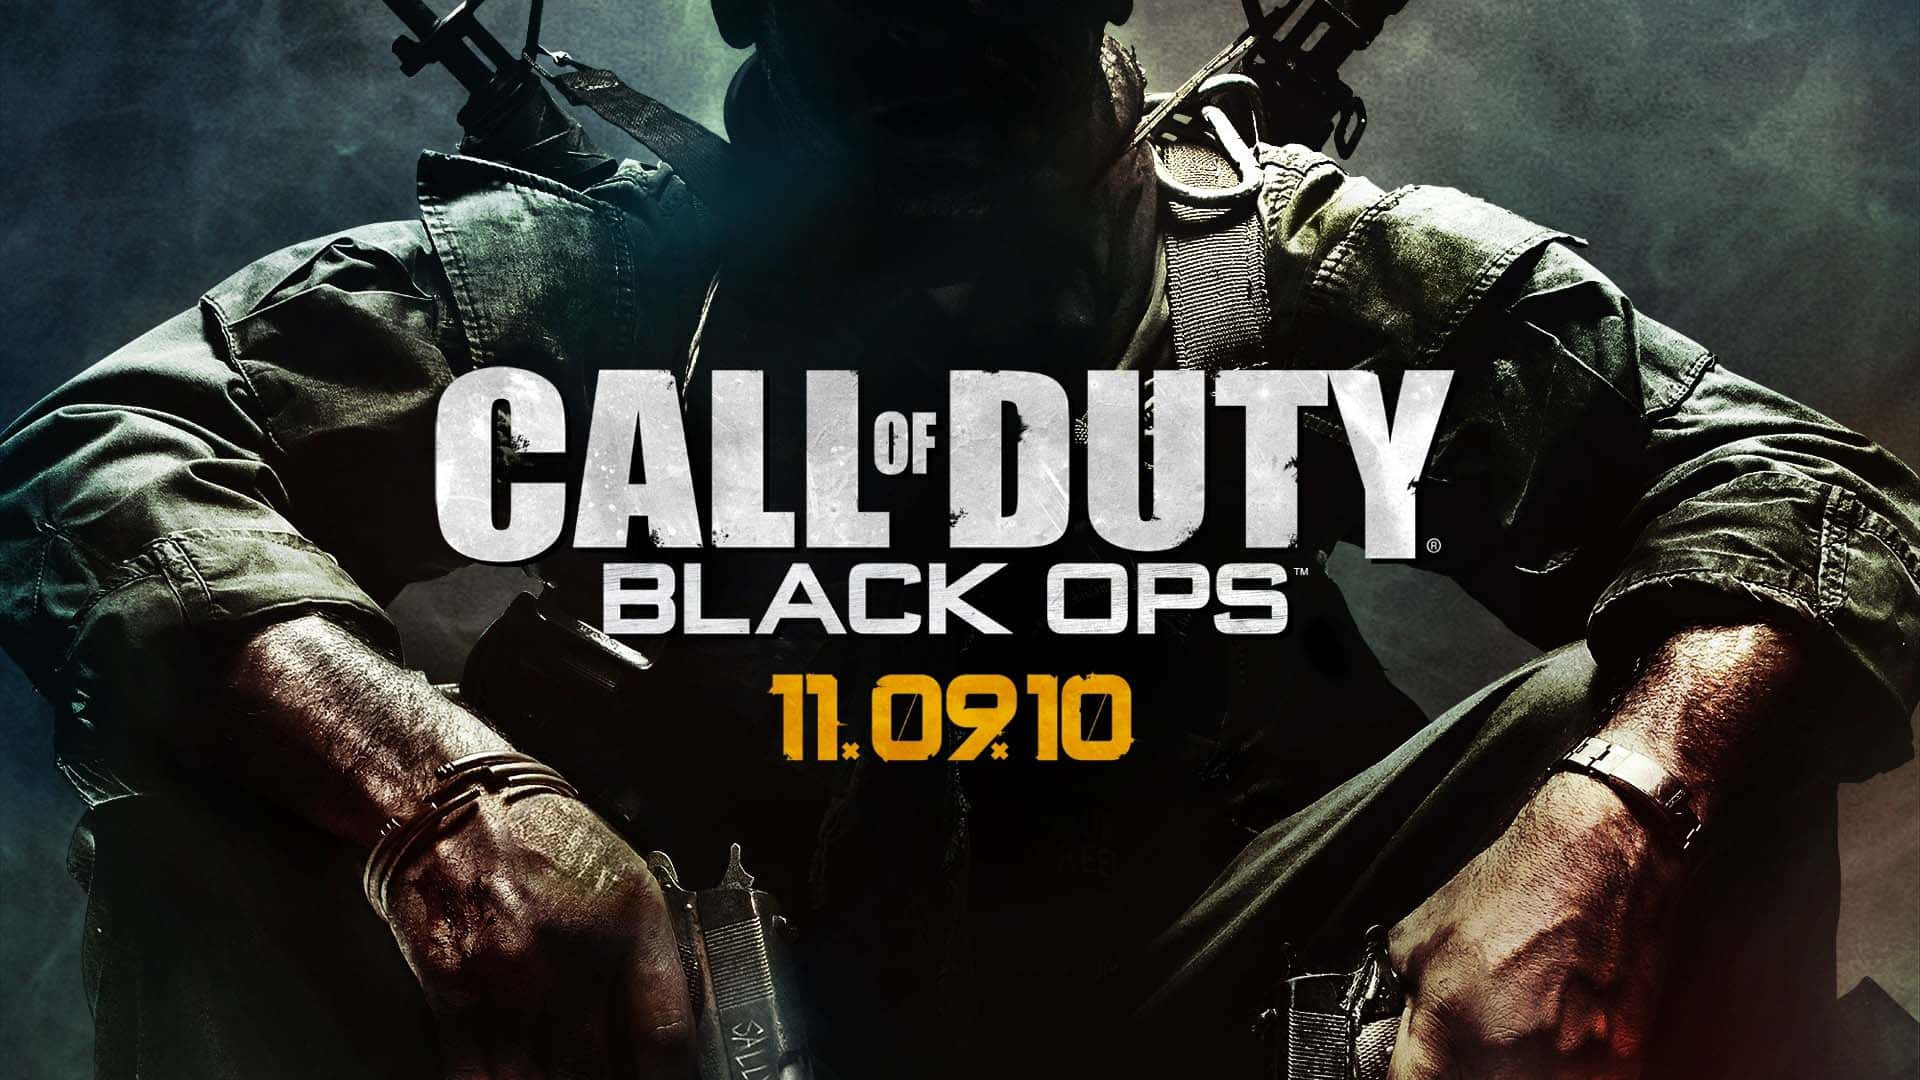 Dive into Action with Call of Duty Black Ops Wallpaper